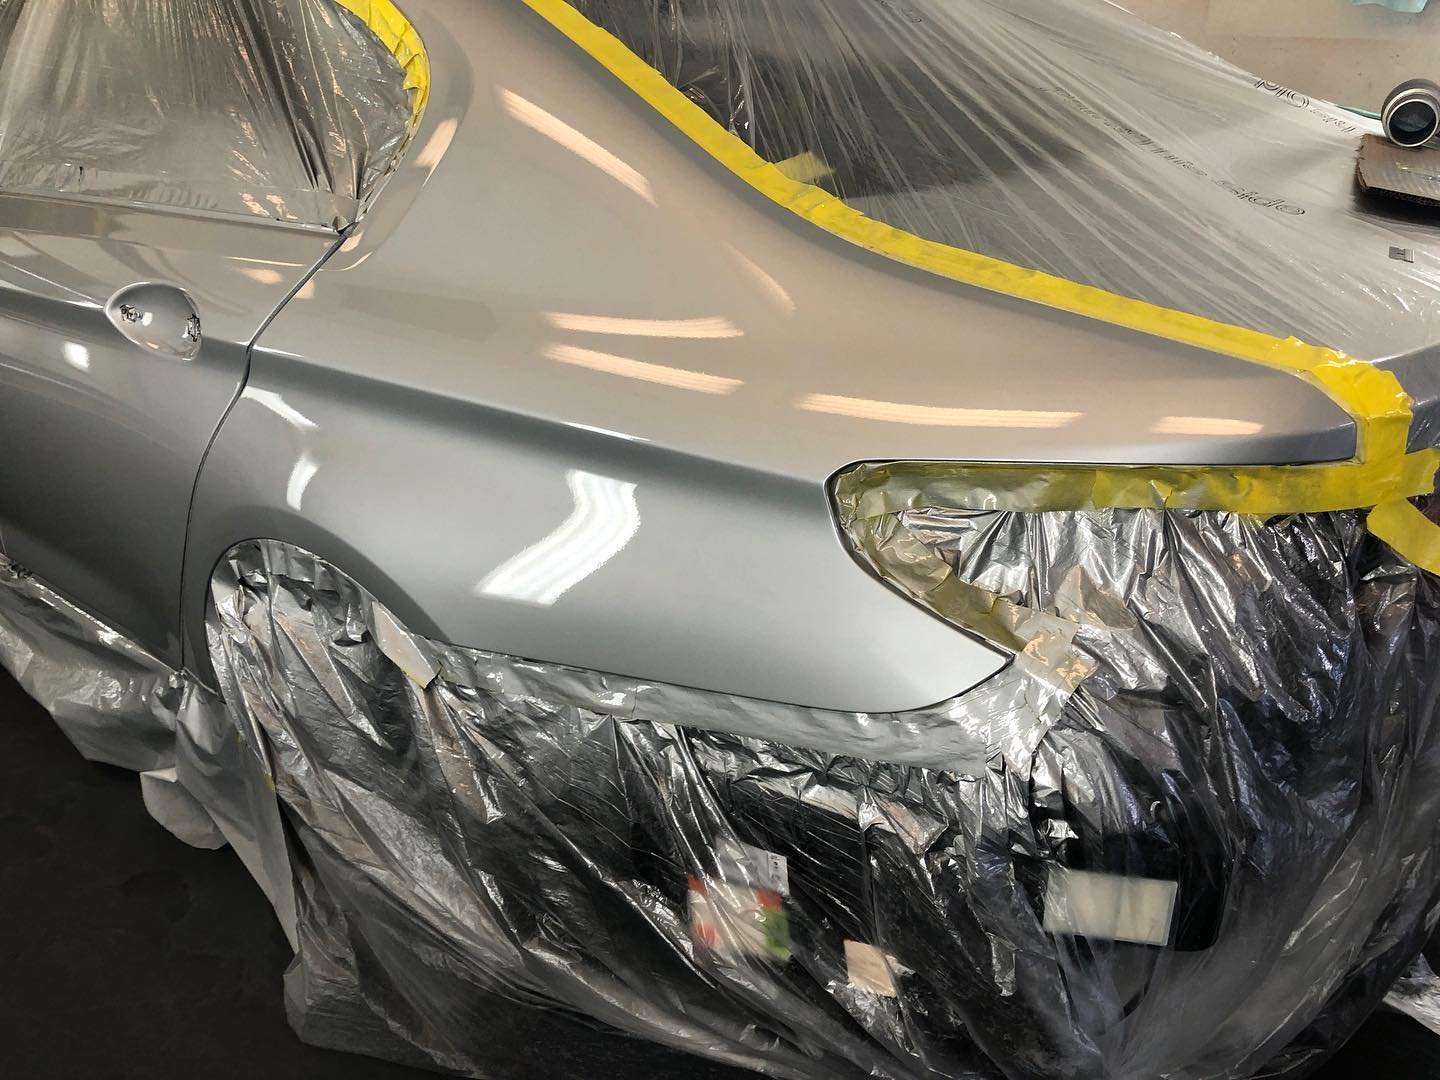 BMW @icareducation Certified Collision Repair. We work with all Insurance Companies. We provide a Lifetime Warranty. We only use OEM parts. 
#bmw
#collision 
#bmwlove 
#bmwgram 
#bmwlife 
@spies.hecker 
@sata_global